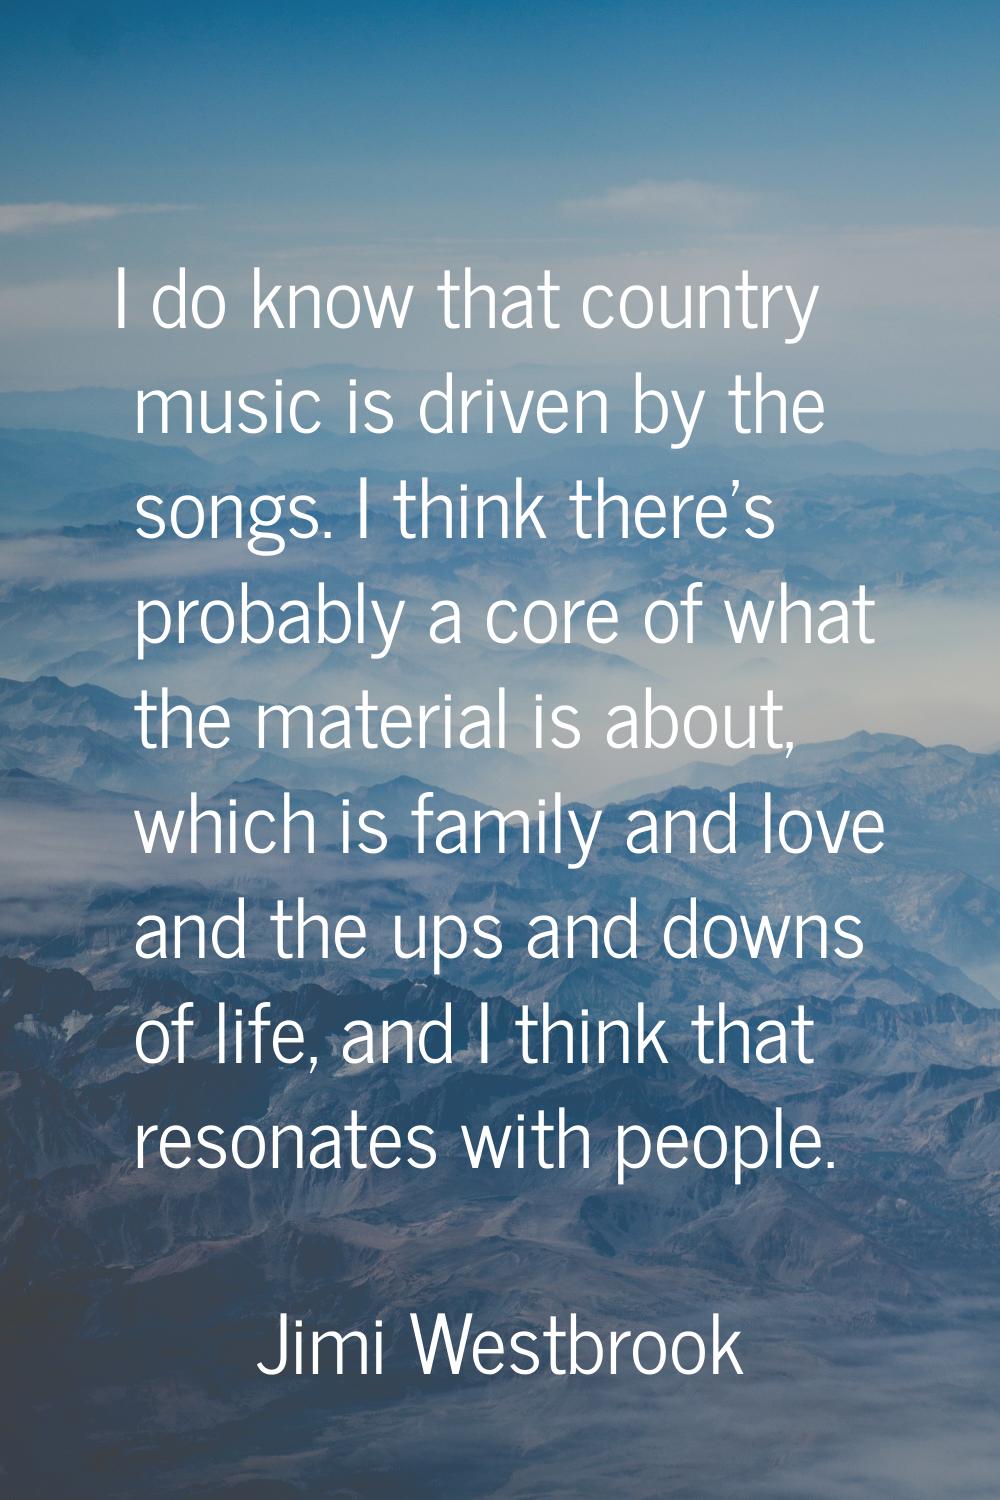 I do know that country music is driven by the songs. I think there's probably a core of what the ma